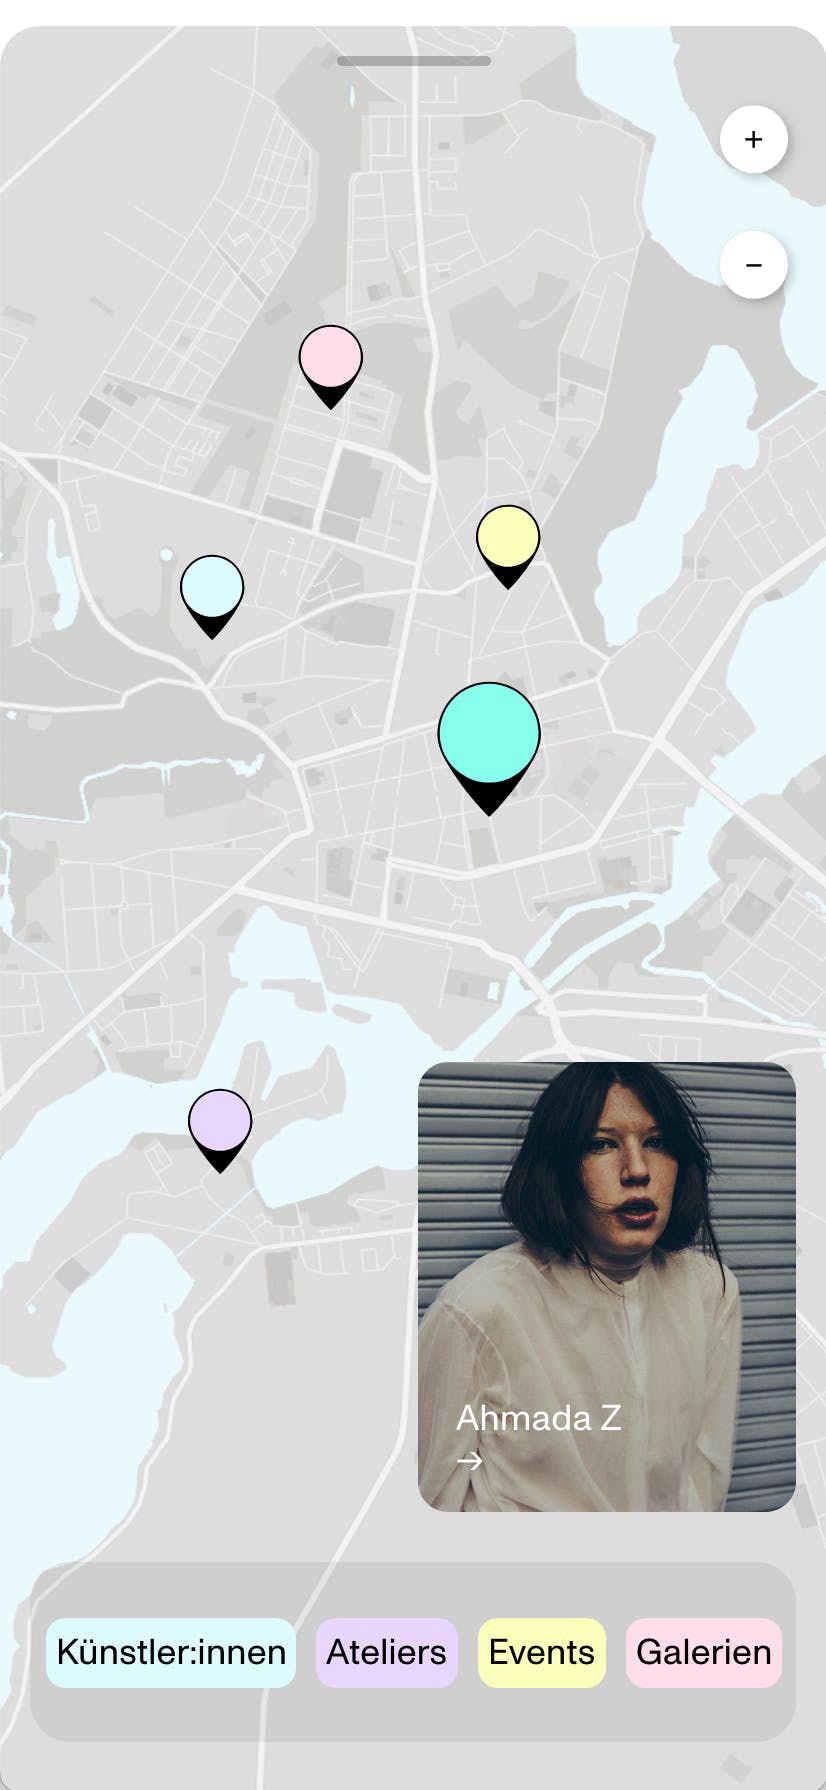 <p>An interactive map shows galleries, artists and events throughout Brandenburg as an overlay. With the help of a filter function and a preview, the various offers can be discovered quickly and easily.</p>